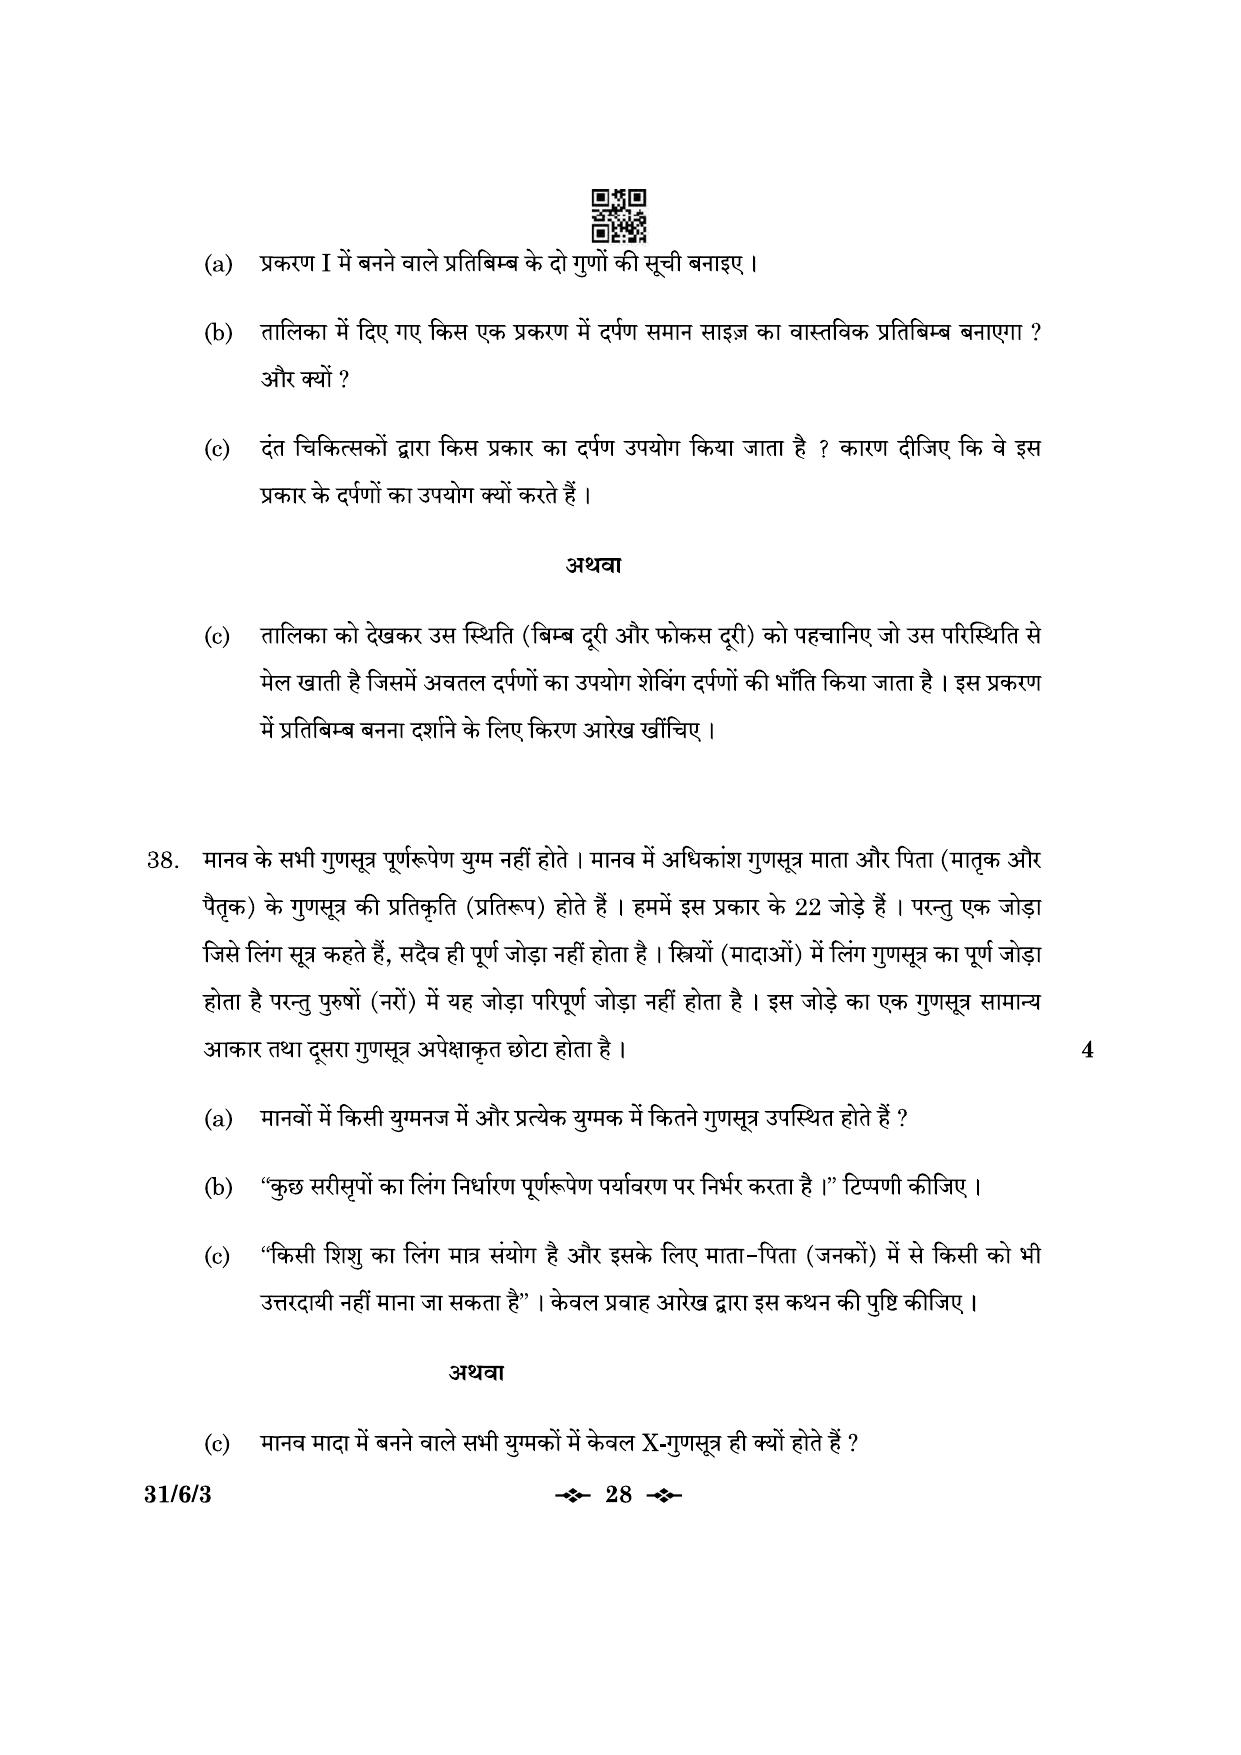 CBSE Class 10 31-6-3 Science 2023 Question Paper - Page 28